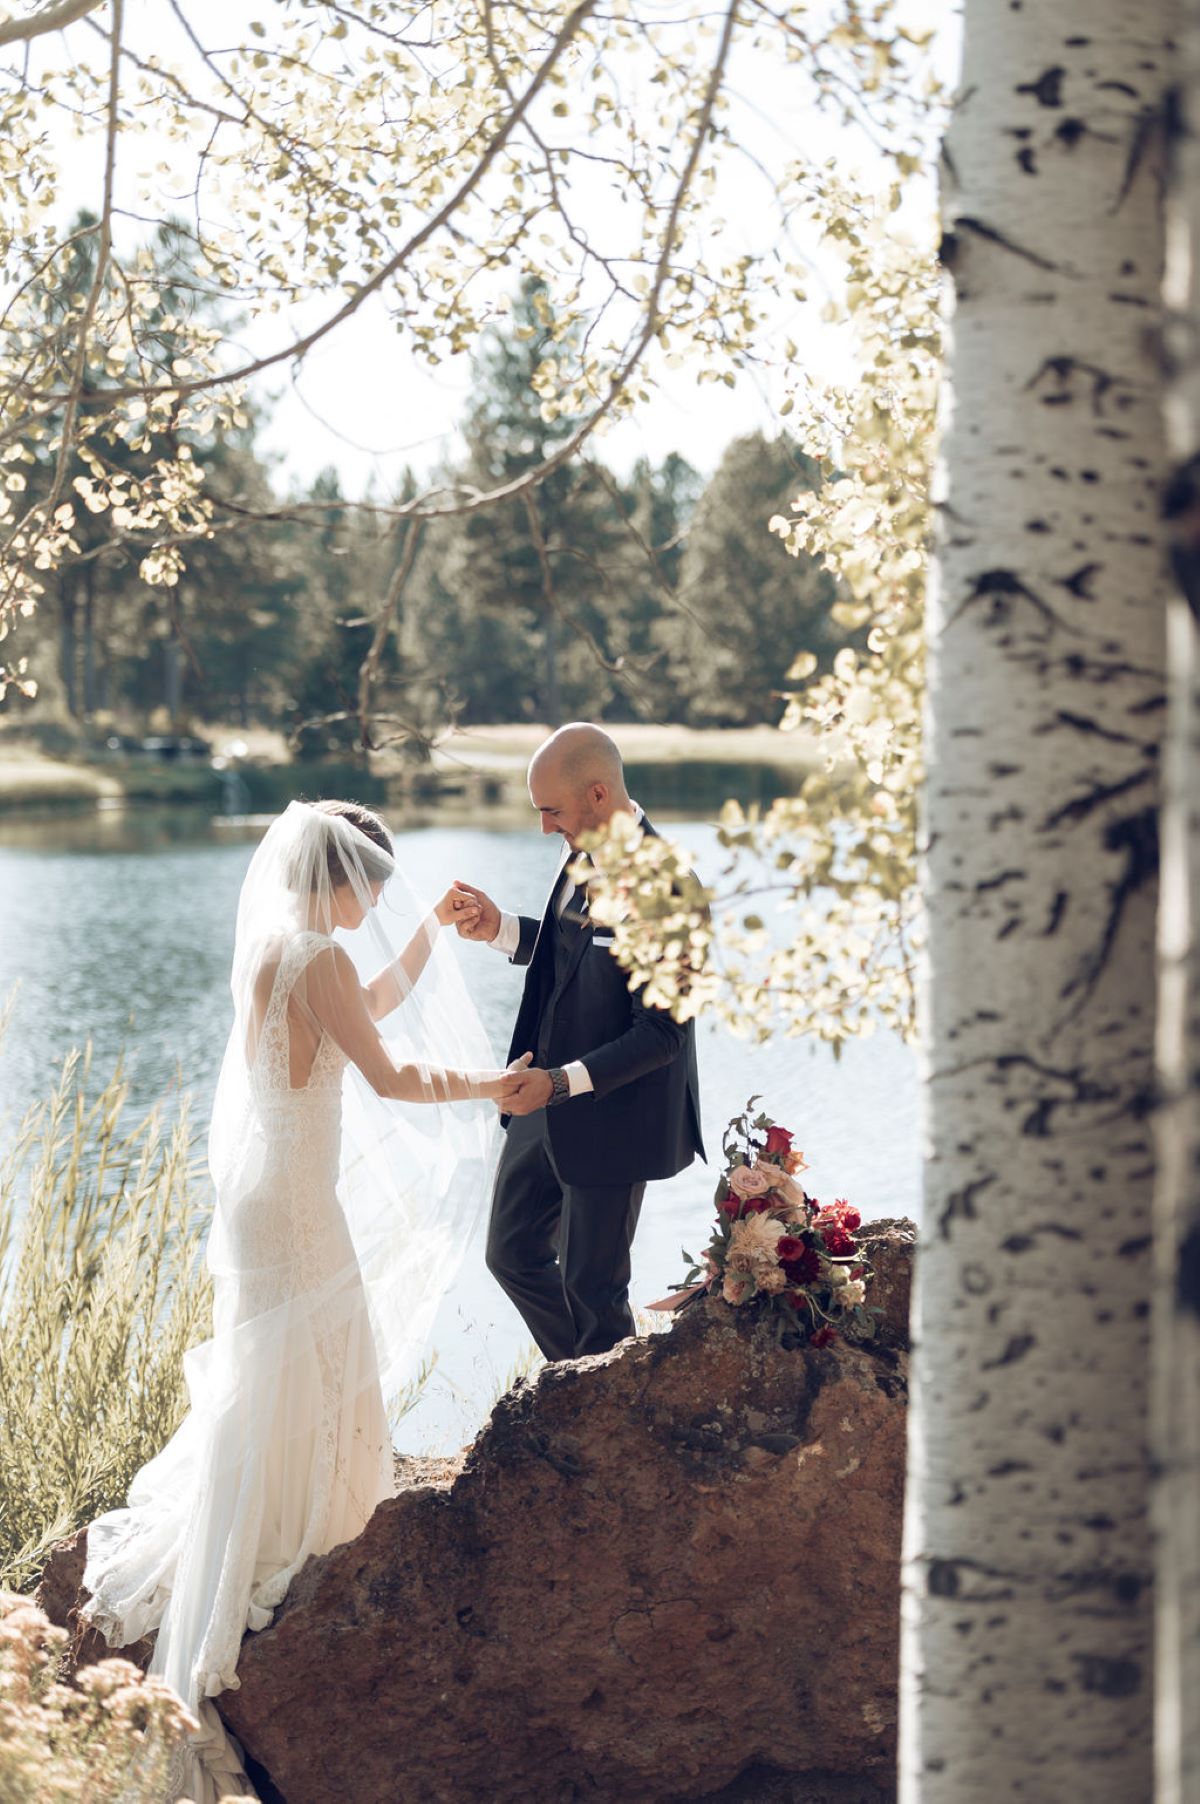 A Picturesque Lakeside Wedding Amongst The Trees for 30k